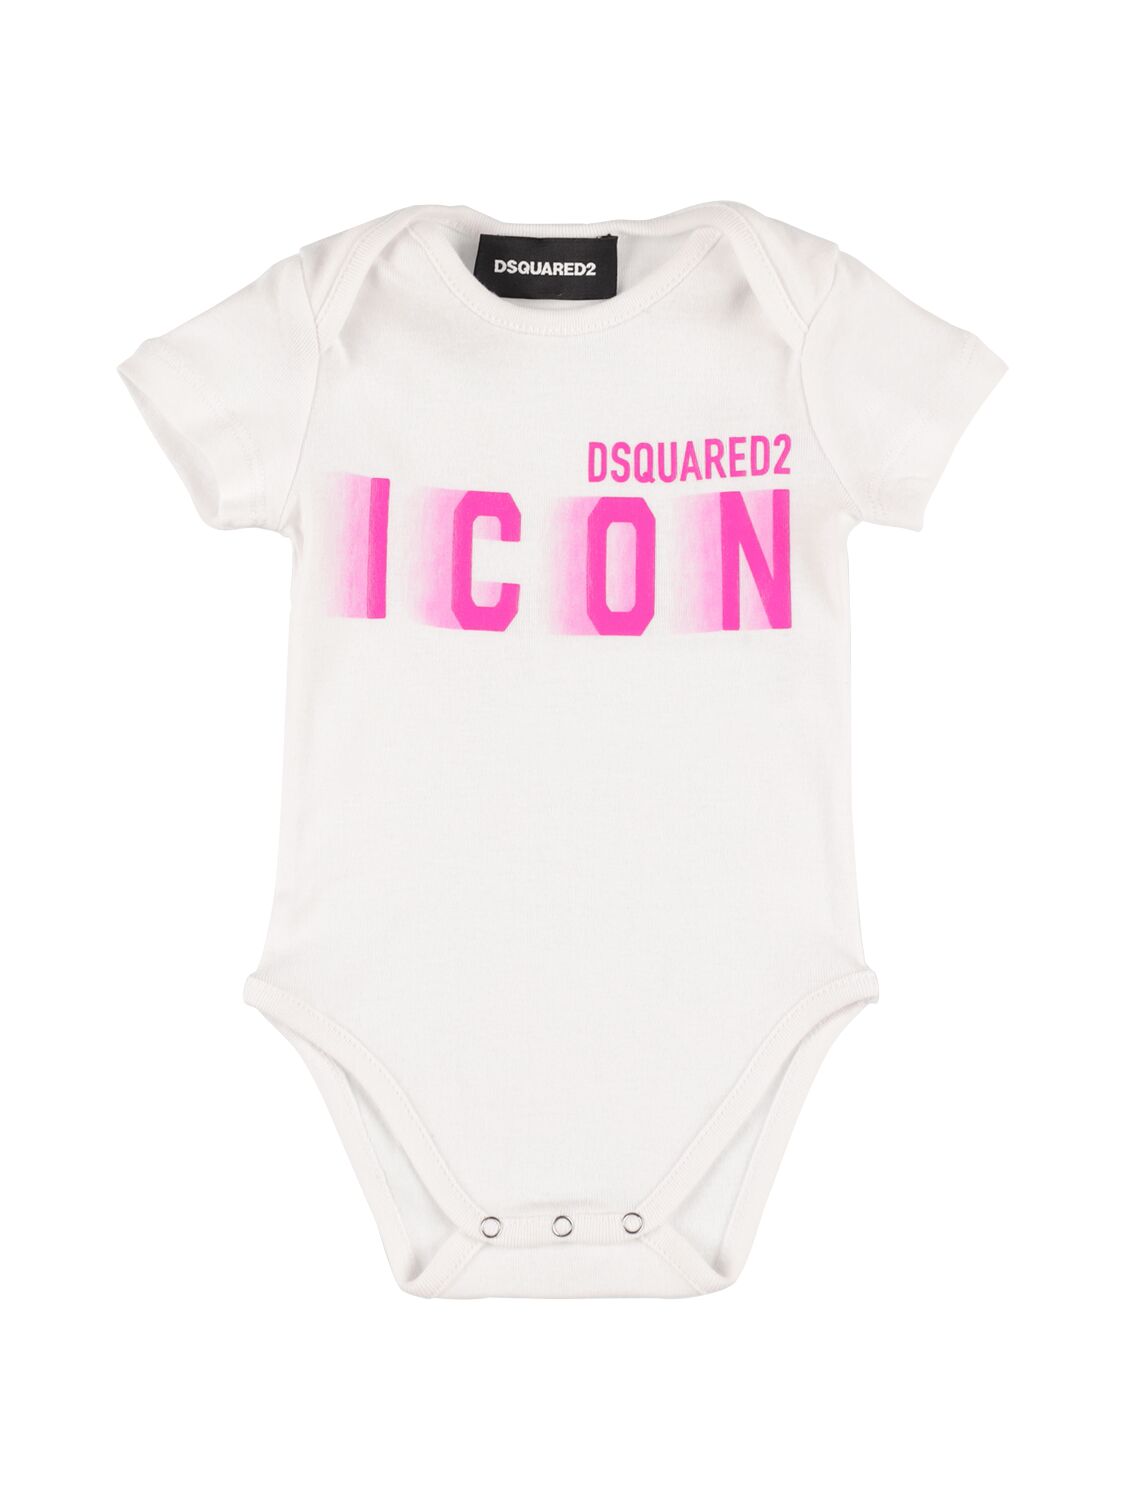 Dsquared2 Babies' Cotton Jersey Bodysuit In White,fuchsia